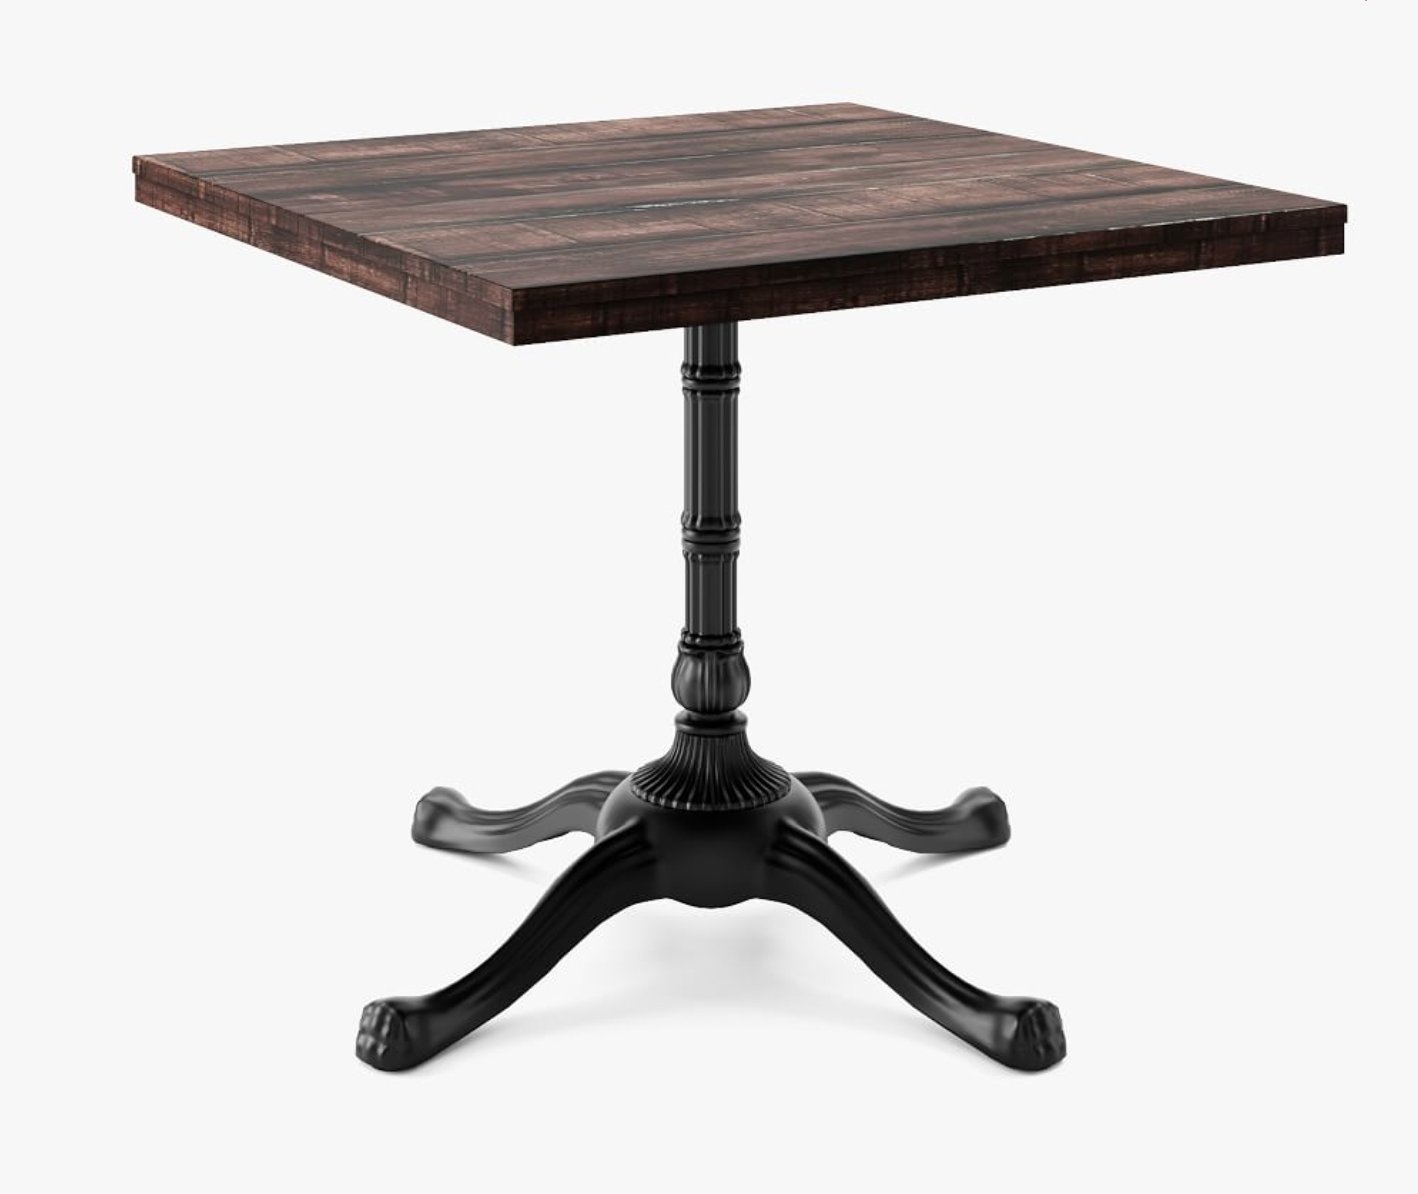 36" Square Pedestal Dining Table, Rustic Mahogany Wood Top, Large Bistro Base - Image 0